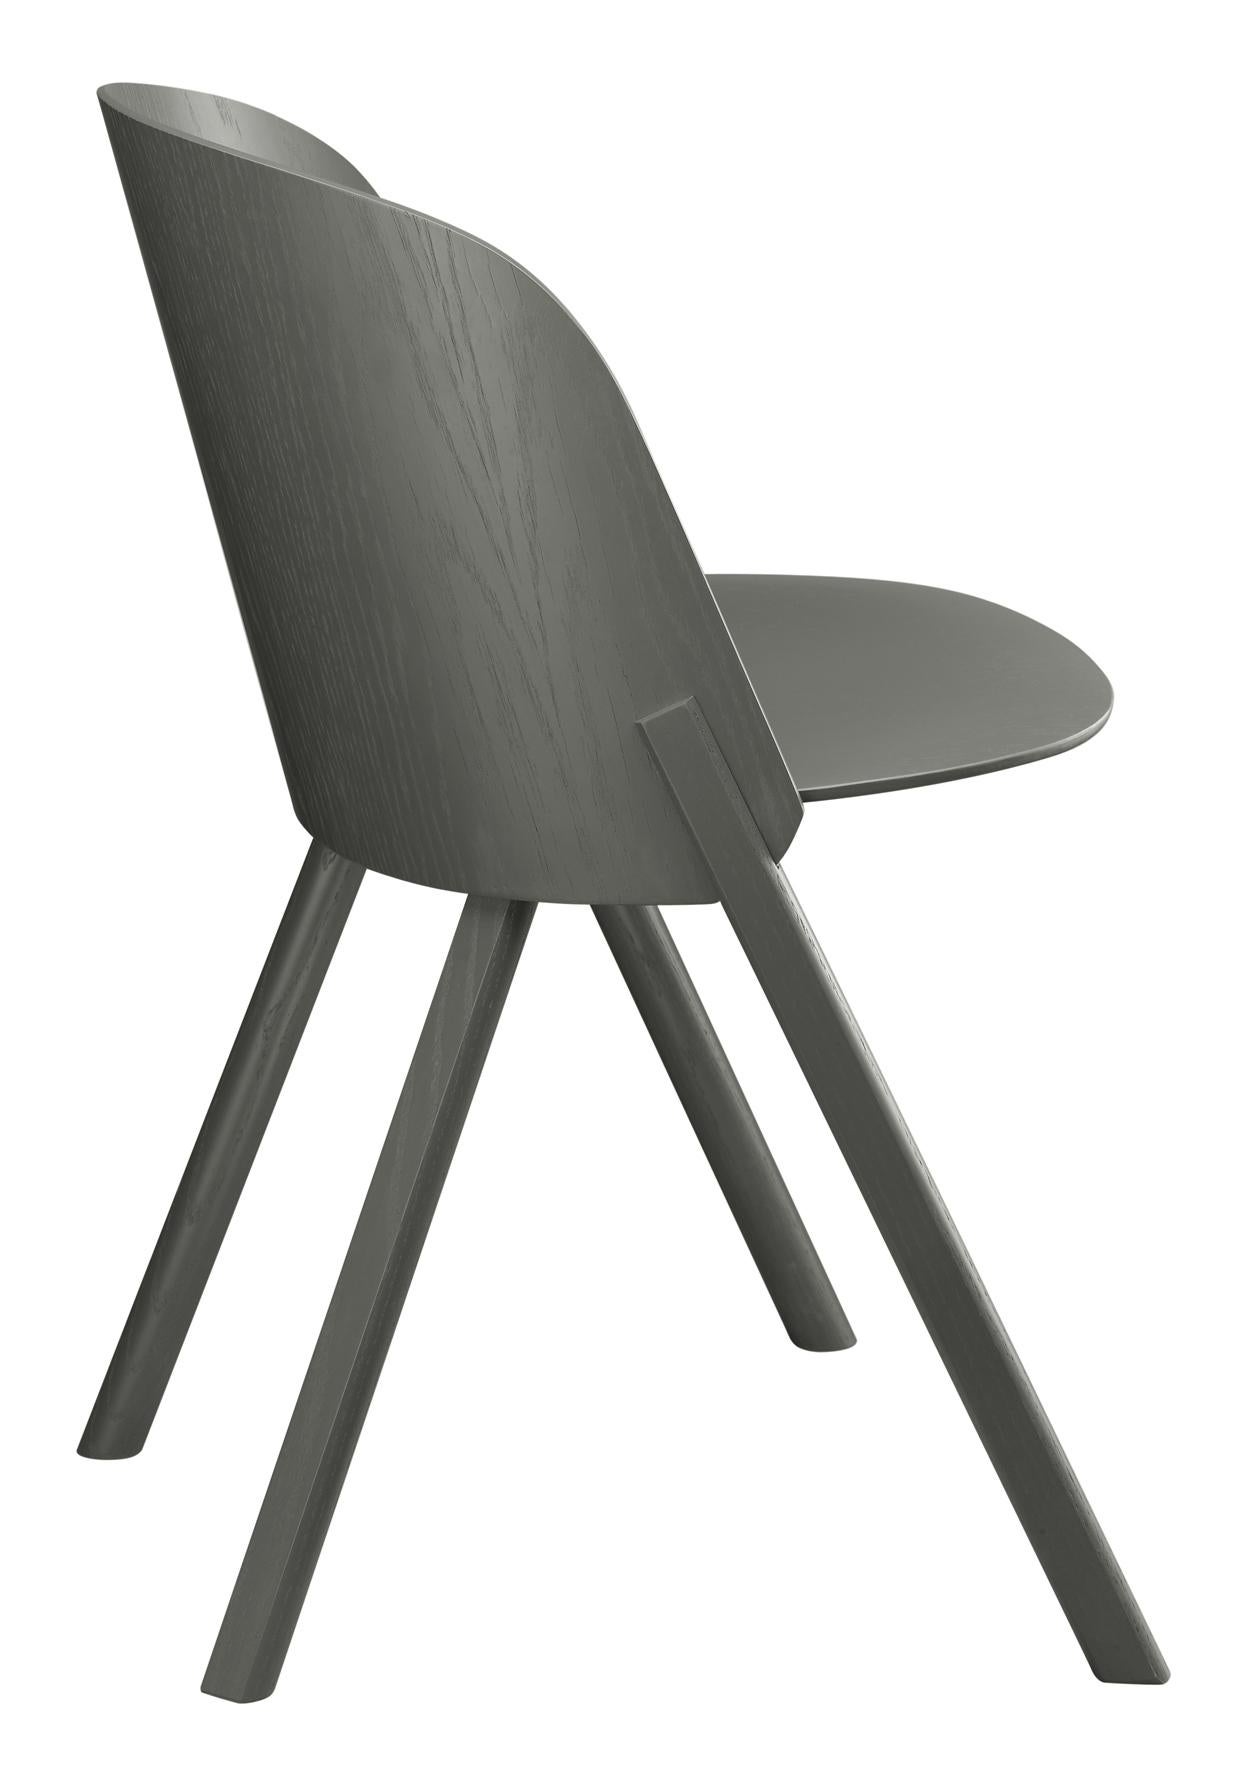 For Sale: Gray (Umbra Gray Lacquer) e15 This Side Chair by Stefan Diez 2